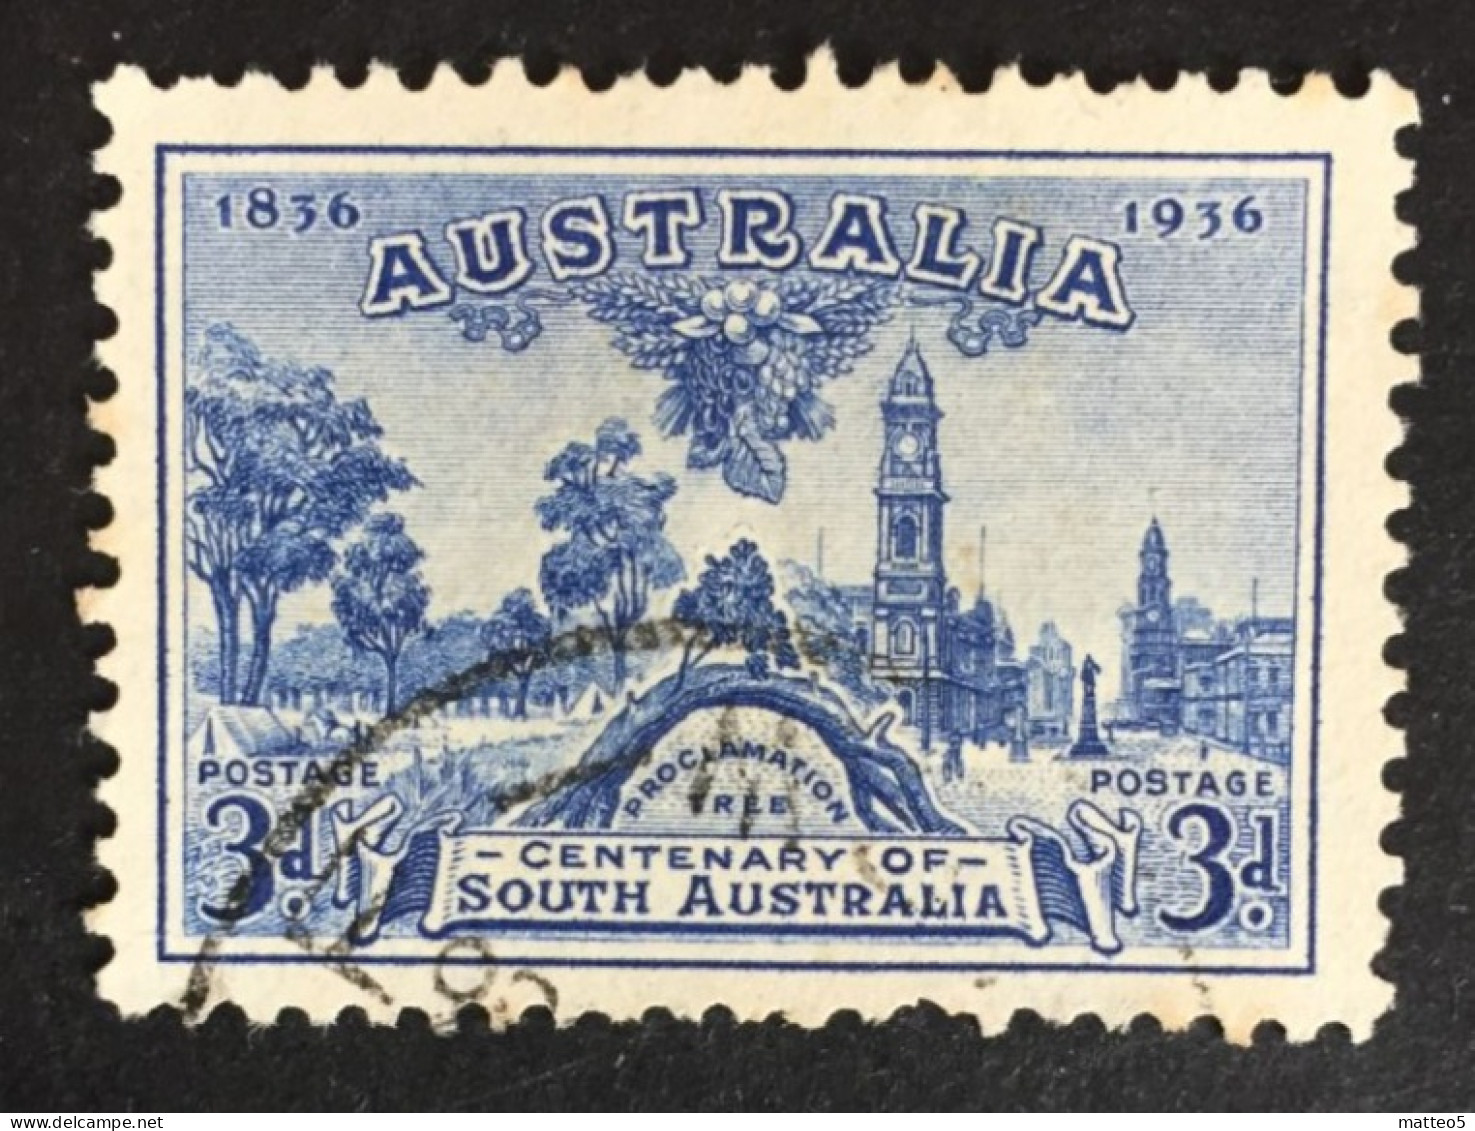 1936 Australia - Centenary Of South Australia - Proclamation Tree And Site Of Adelaide 1836 - Used - Usados